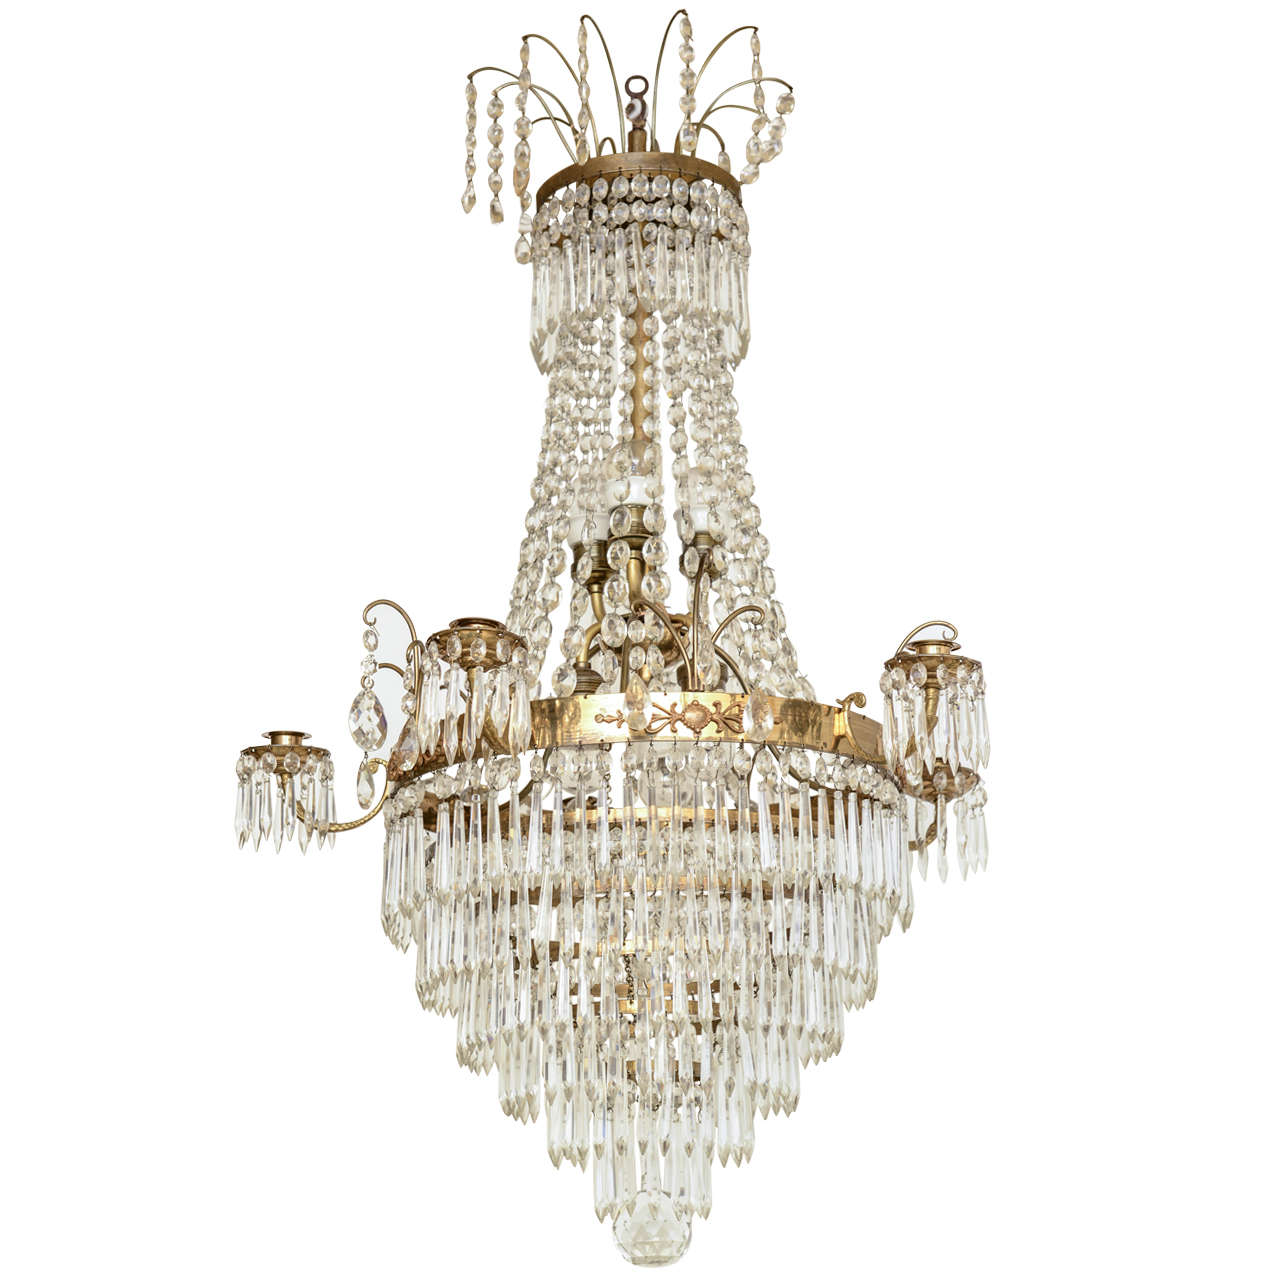 Antique Swedish Crystal Chandelier  Mid 19th Century For Sale